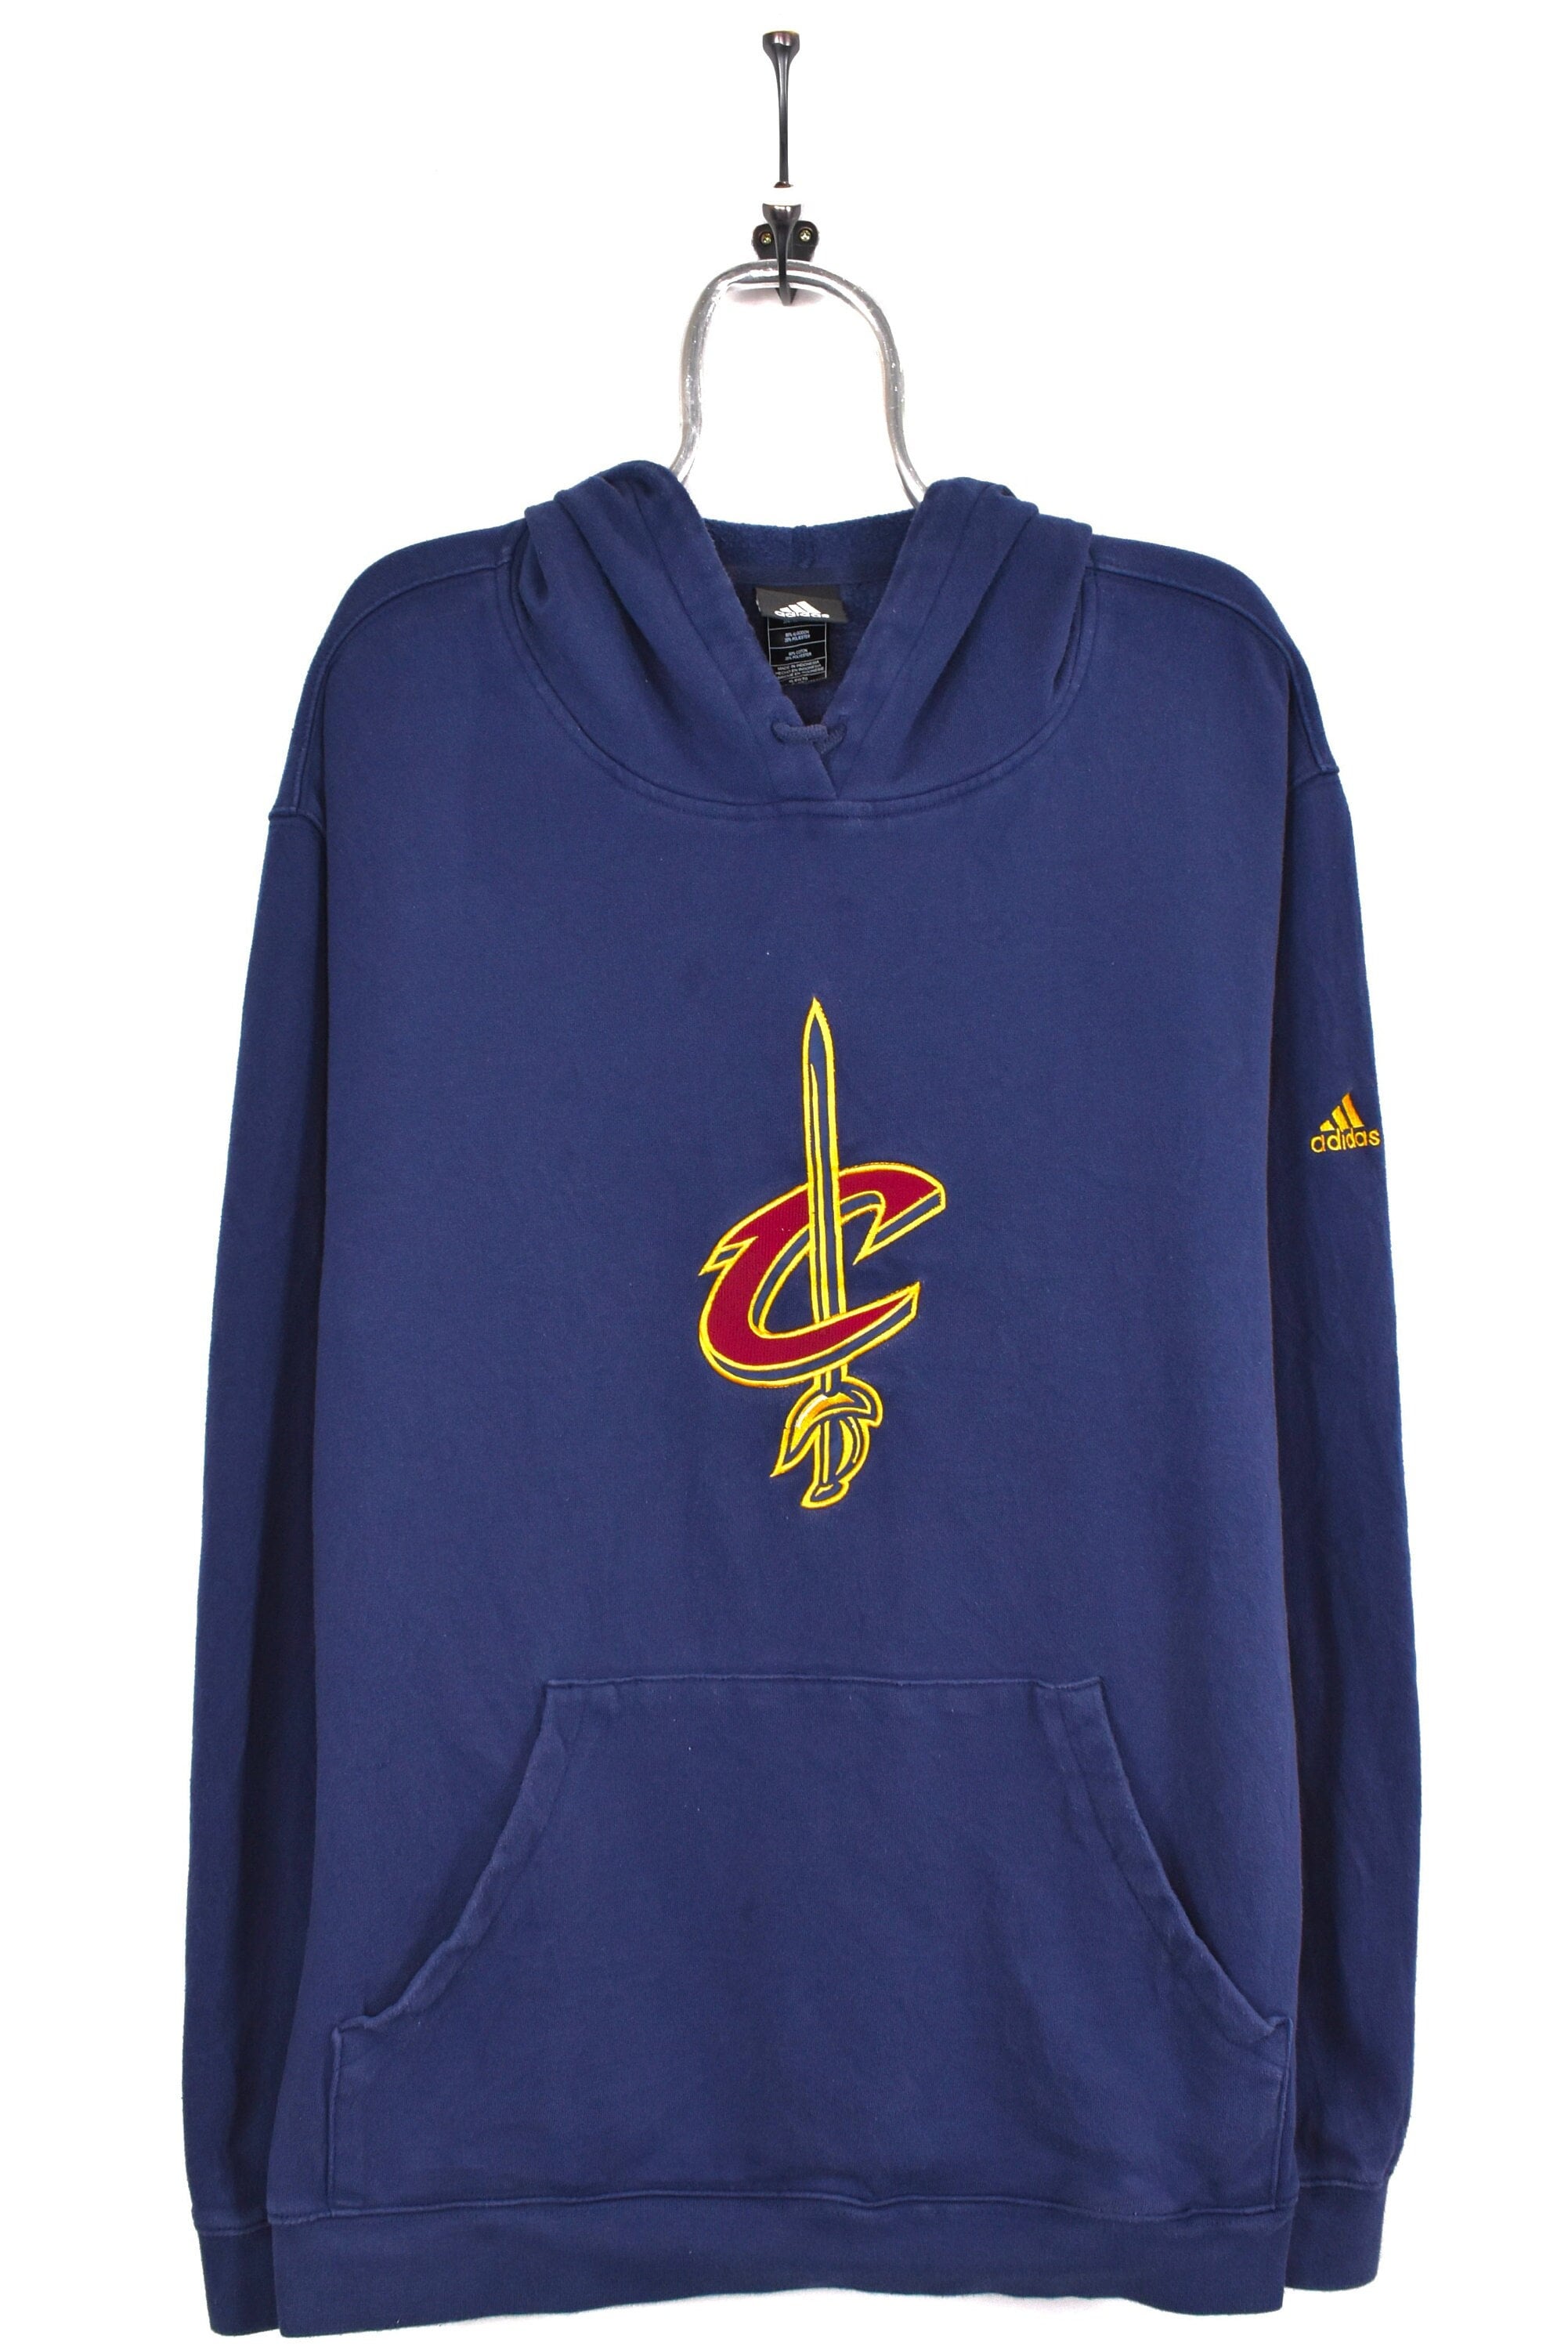 NBA Mens Black Pullover Hoodie Cleveland Cavaliers - Size S